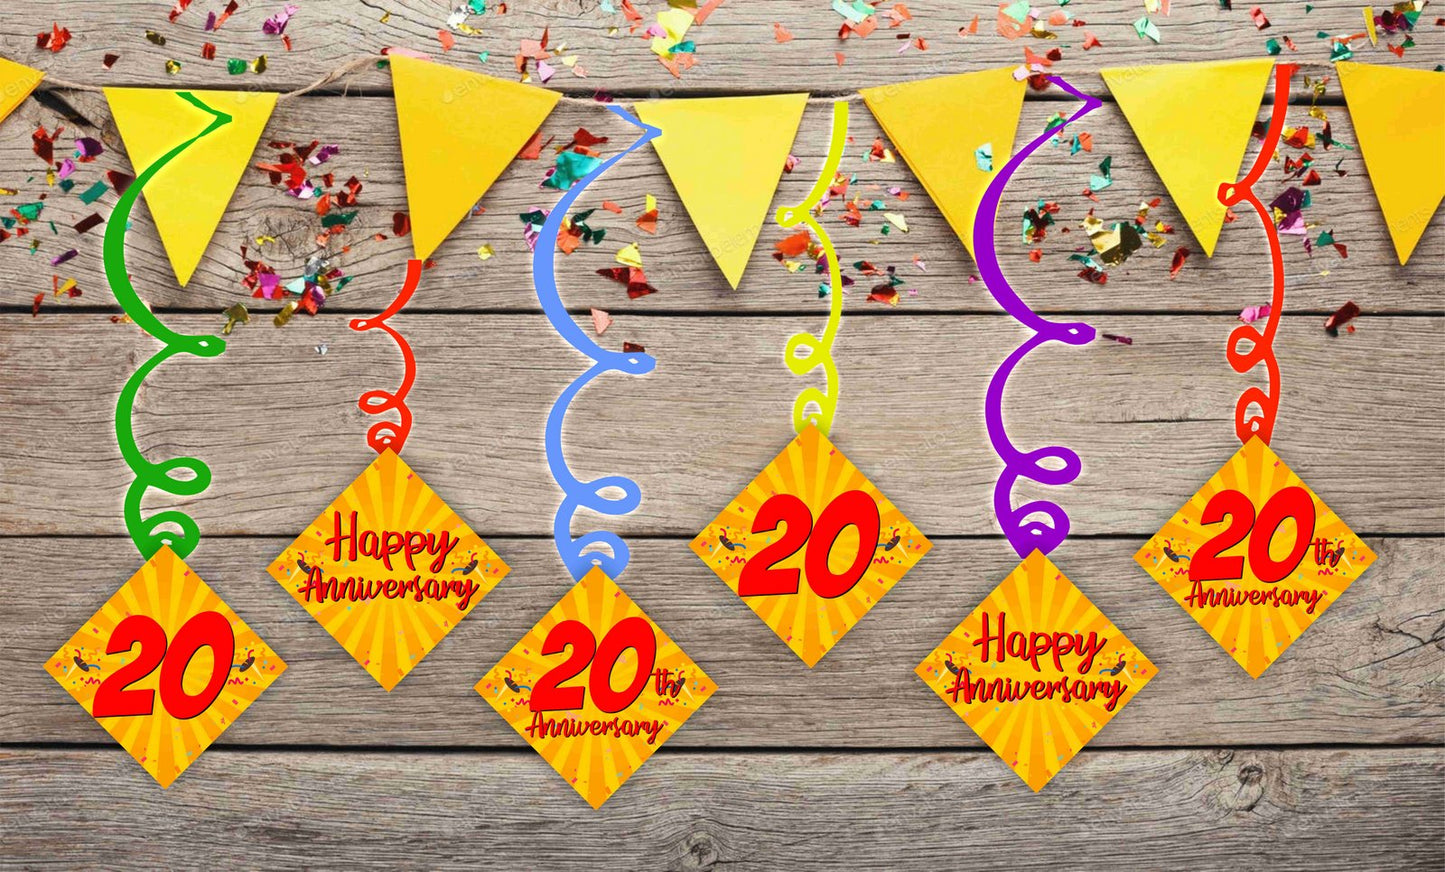 20th Anniversary Ceiling Hanging Swirls Decorations Cutout Festive Party Supplies (Pack of 6 swirls and cutout)